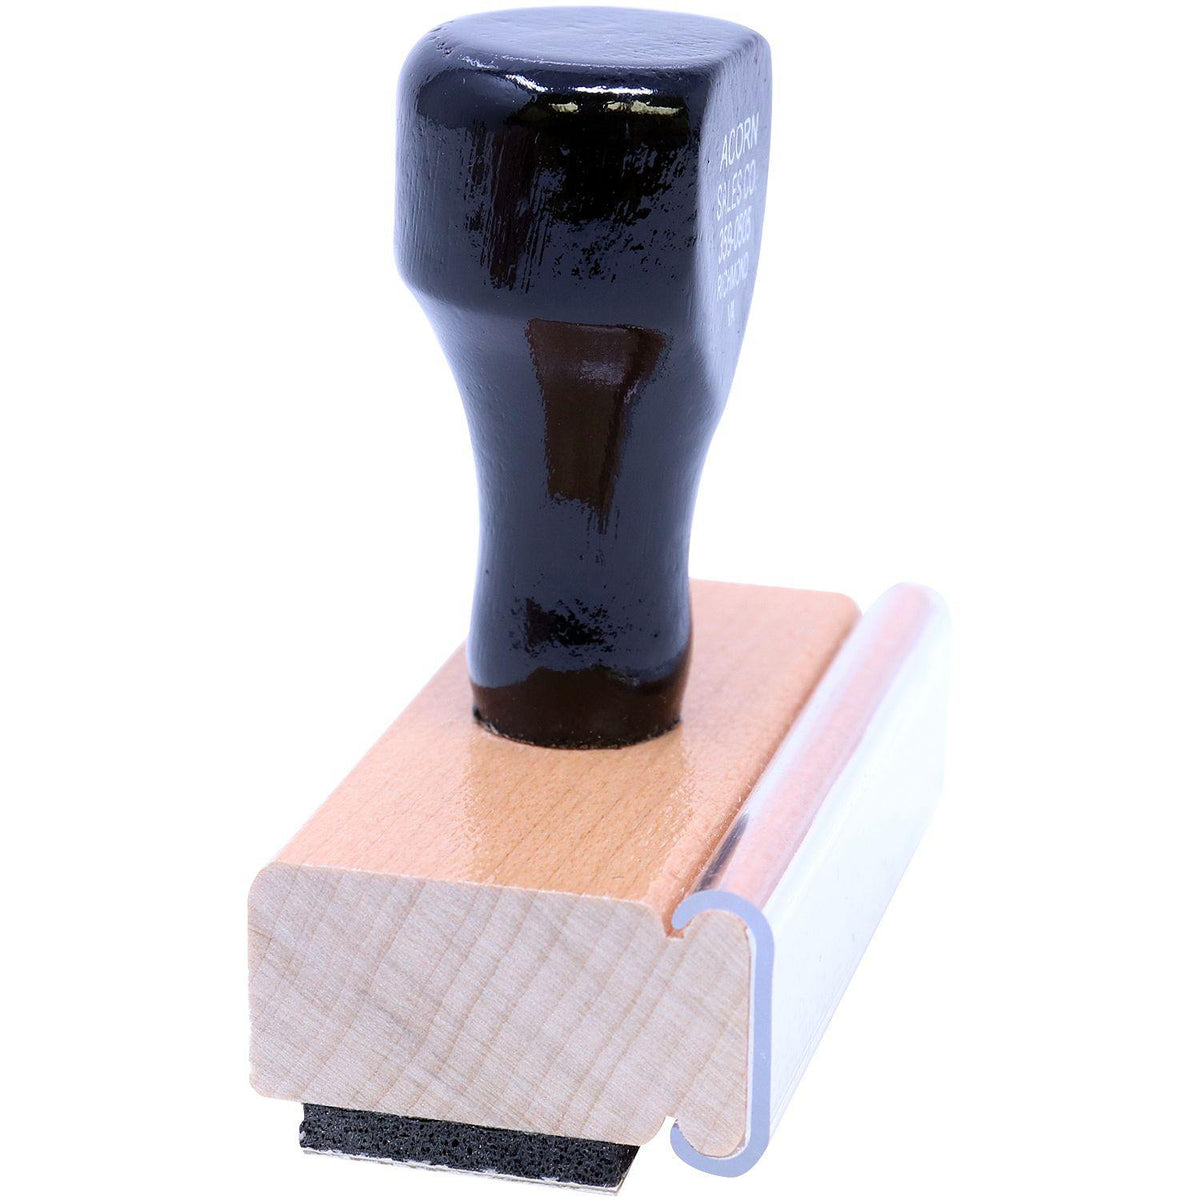 Side View of Large PTA Rubber Stamp at an Angle